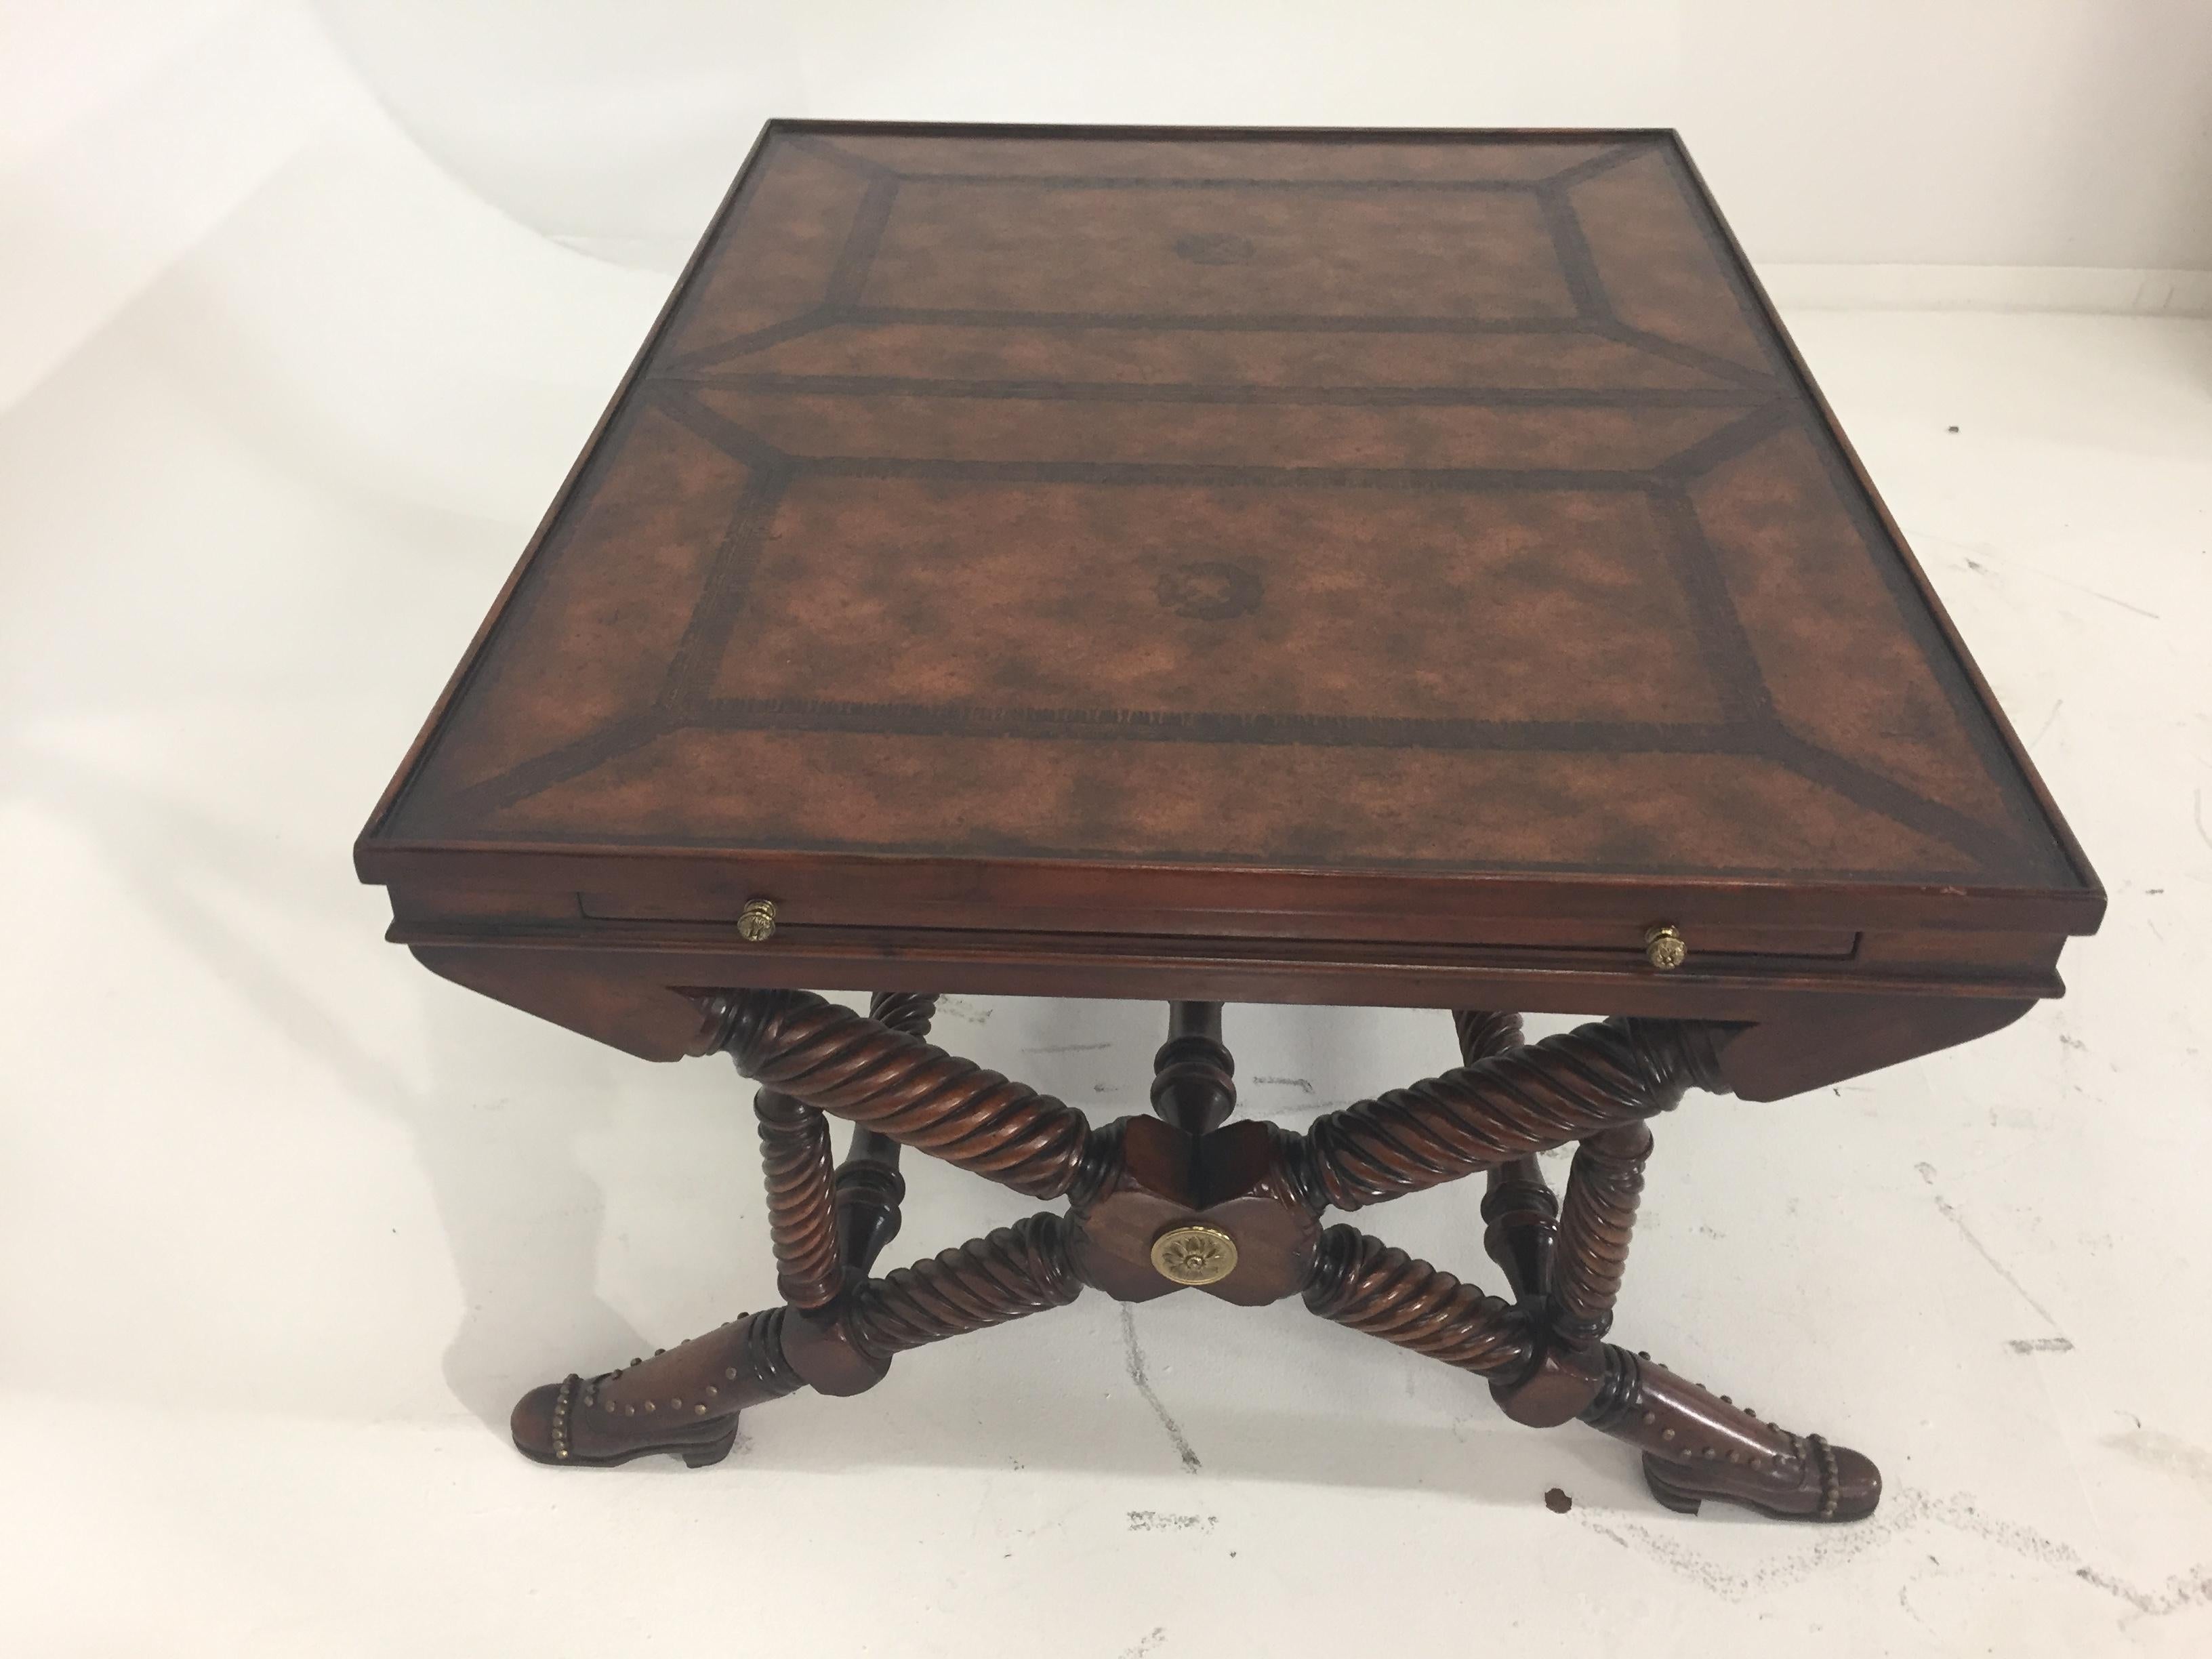 North American Whimsical Mahogany and Leather Theodore Alexander Coffee Table with Shoe Feet